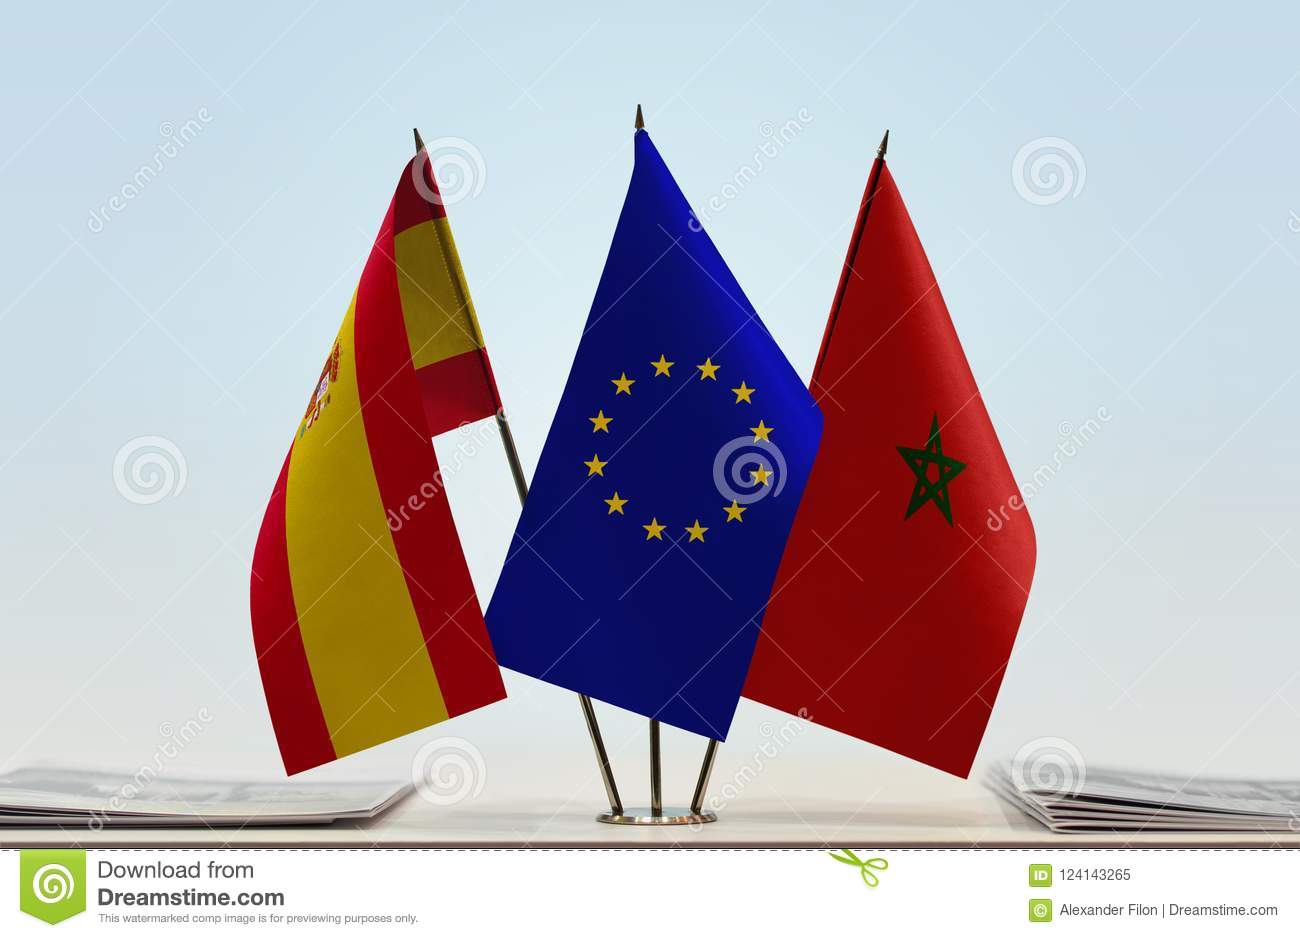 Morocco’s role in fight against terrorism, illegal immigration crucial for Spain, EU